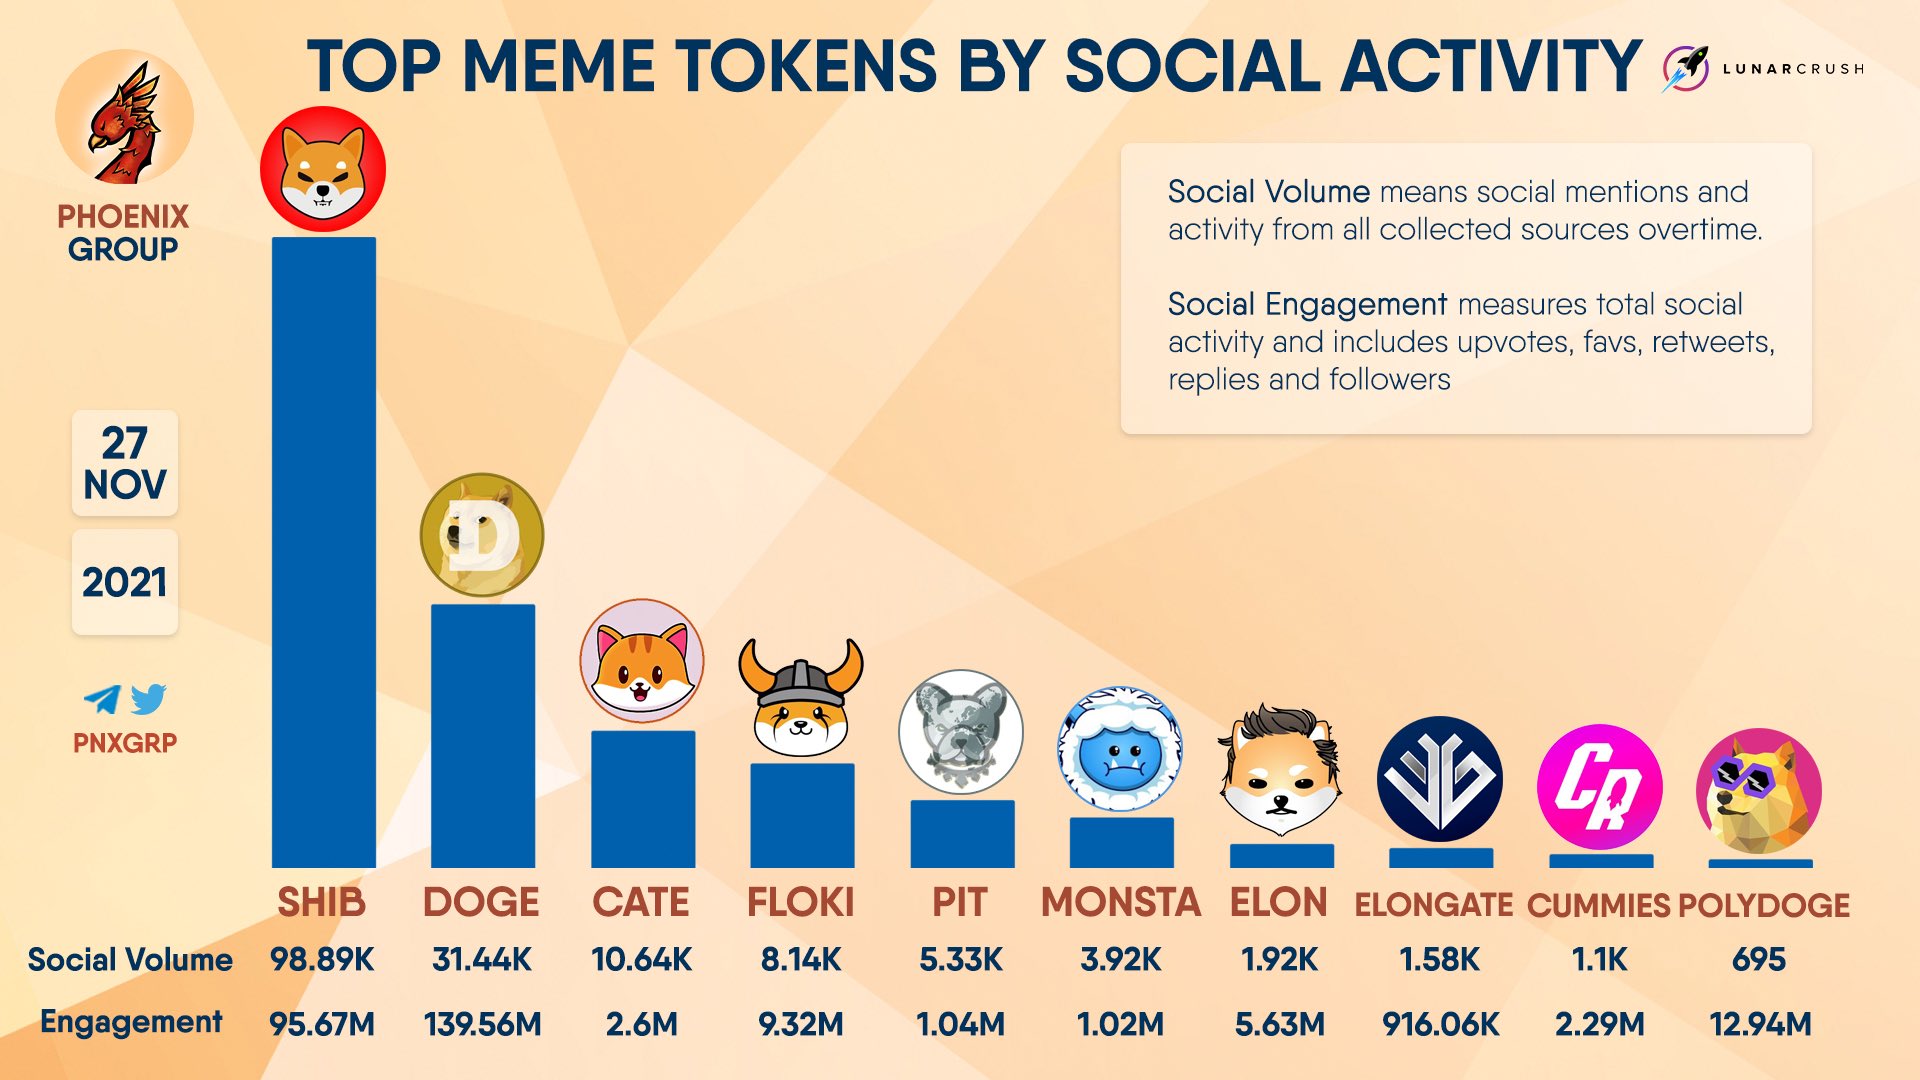 Top MEME Tokens by Social Activity